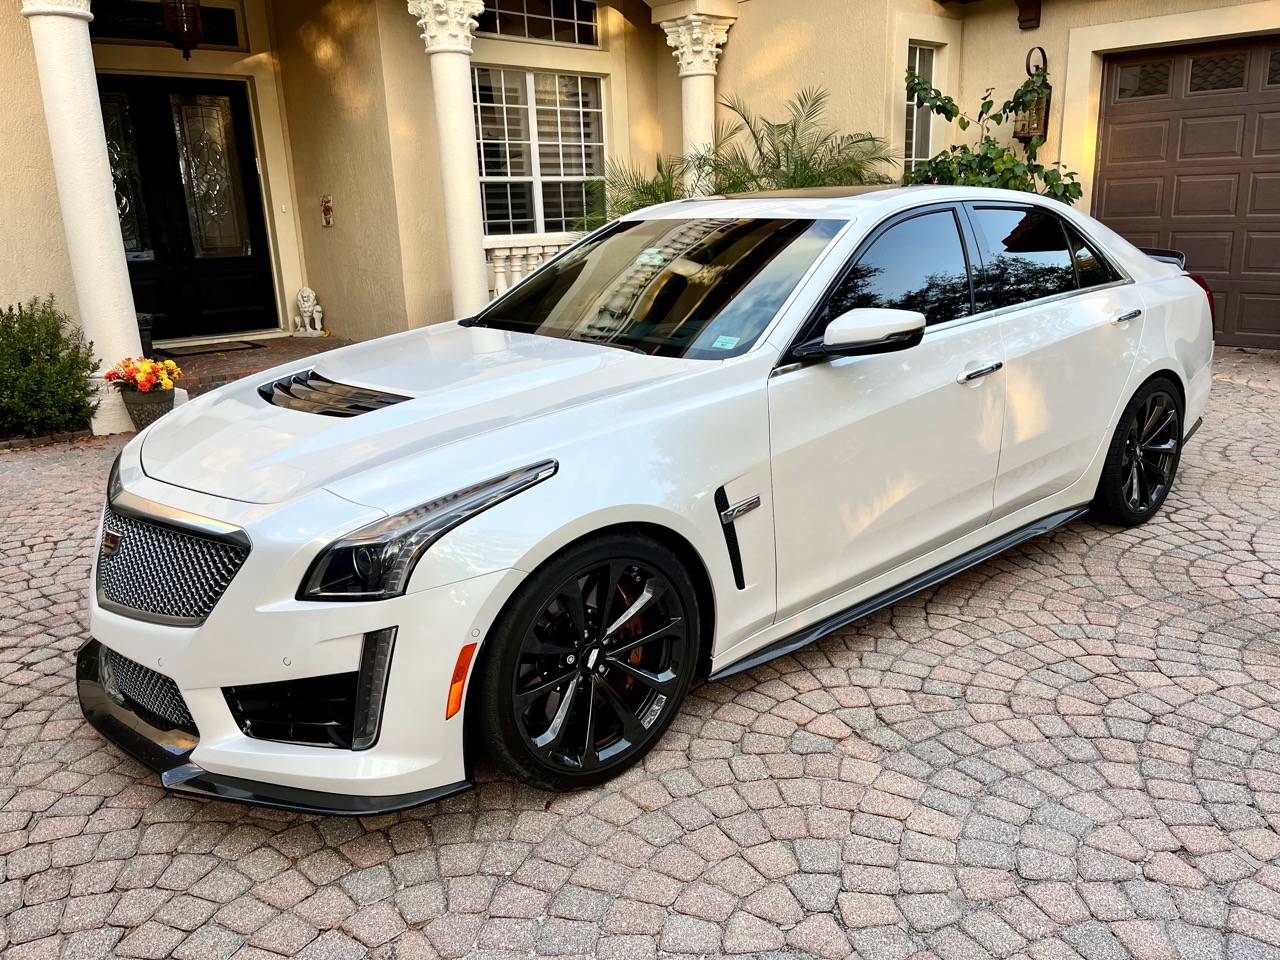 Used 2019 Cadillac CTS-V for Sale Near Me | Cars.com